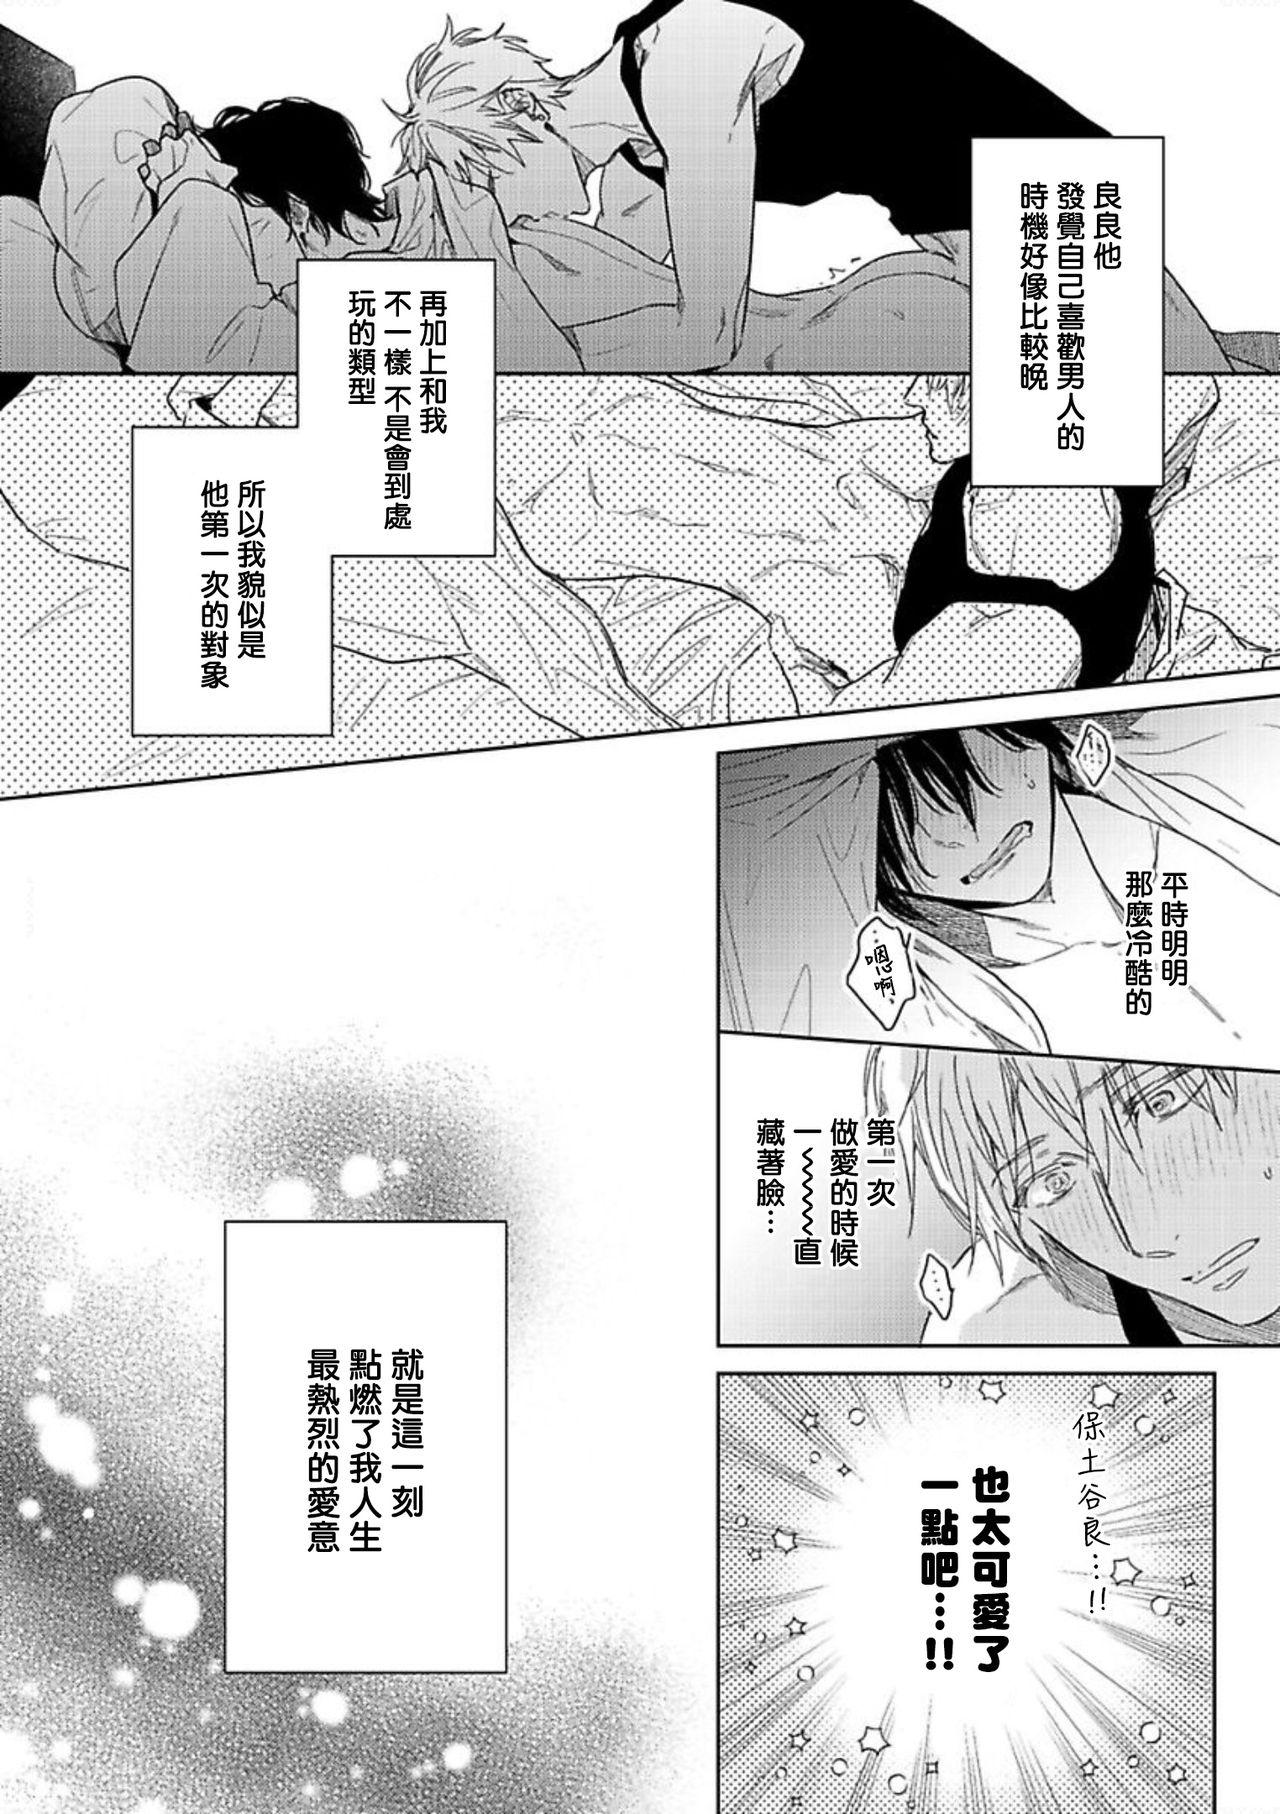 Tasogare Cure Important | 黄昏CURE IMPORTENT Ch. 1-3 68